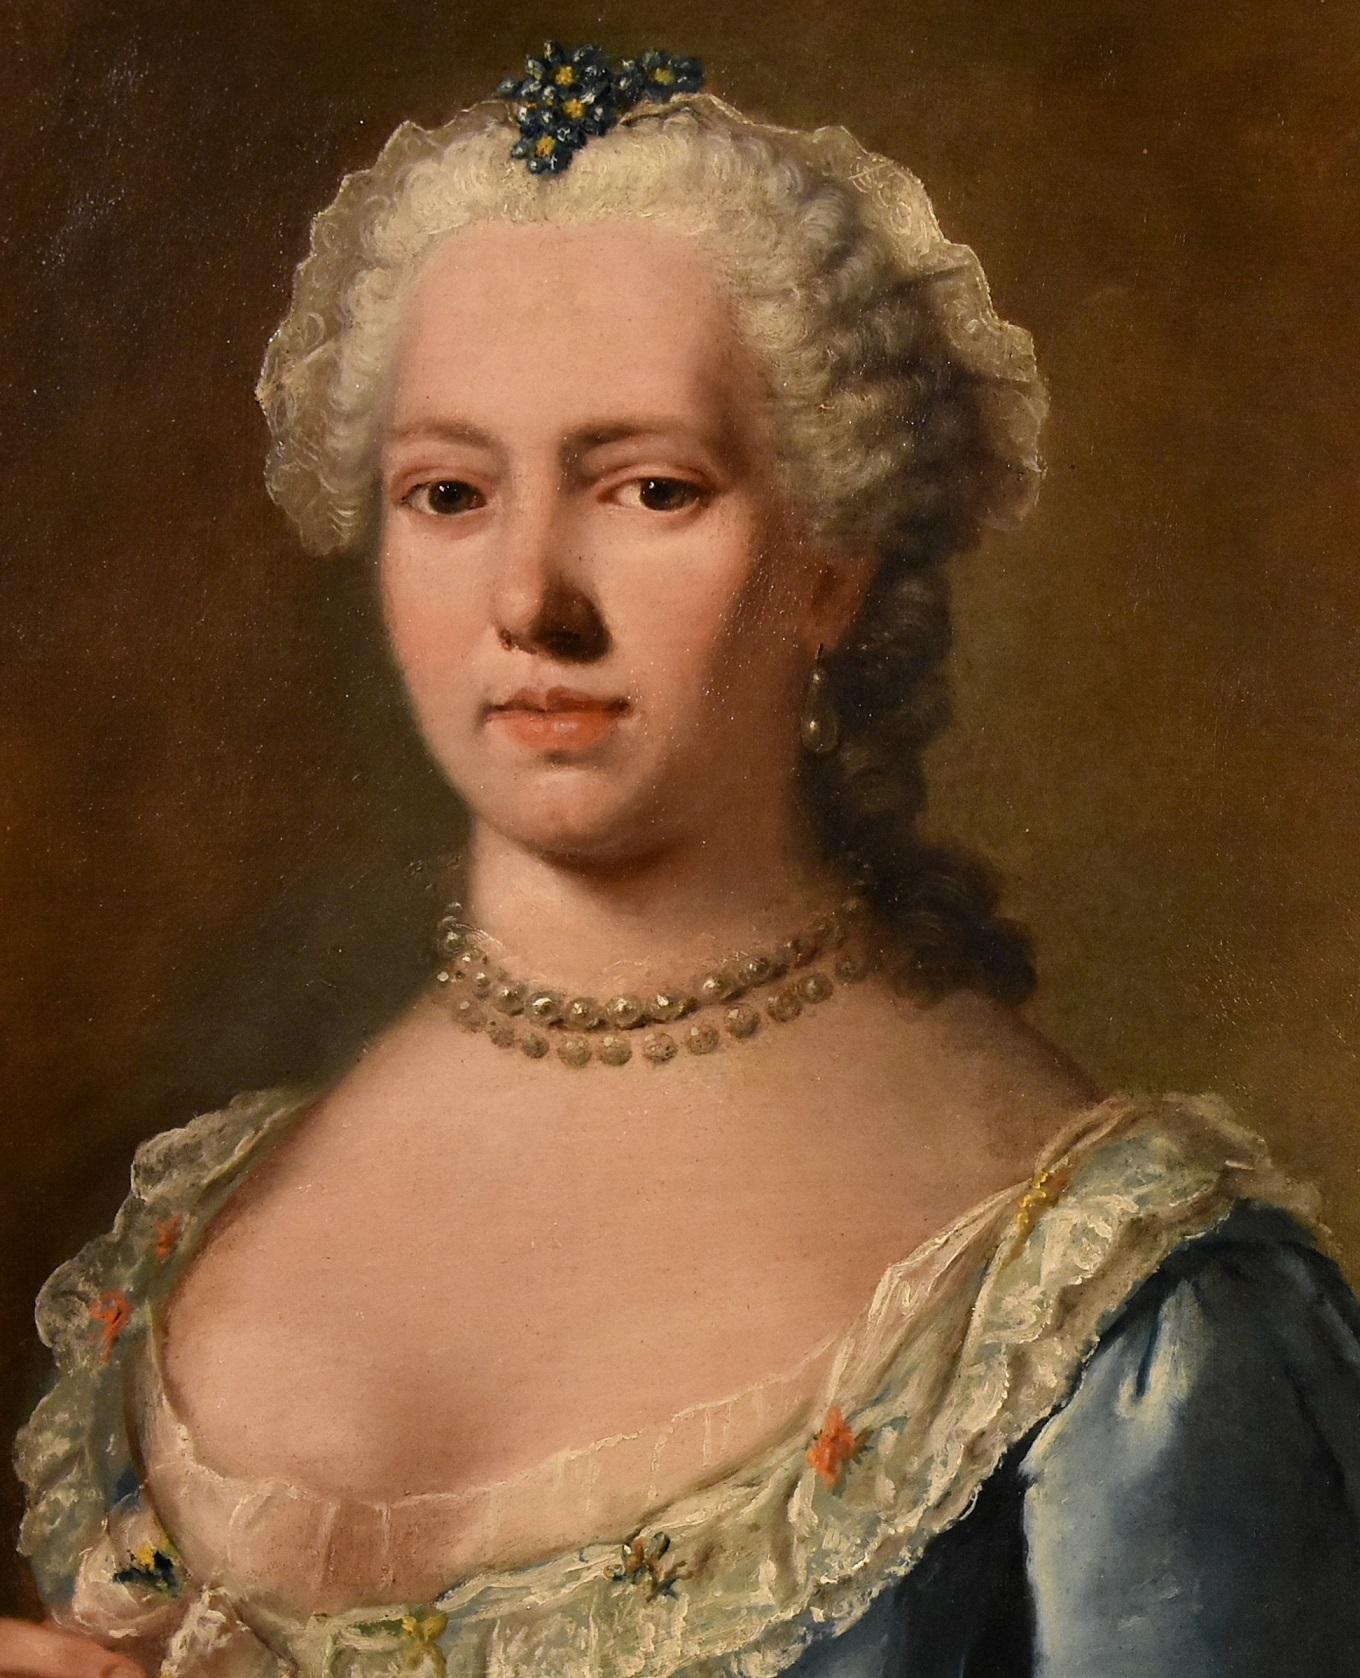 18th century old portrait paintings